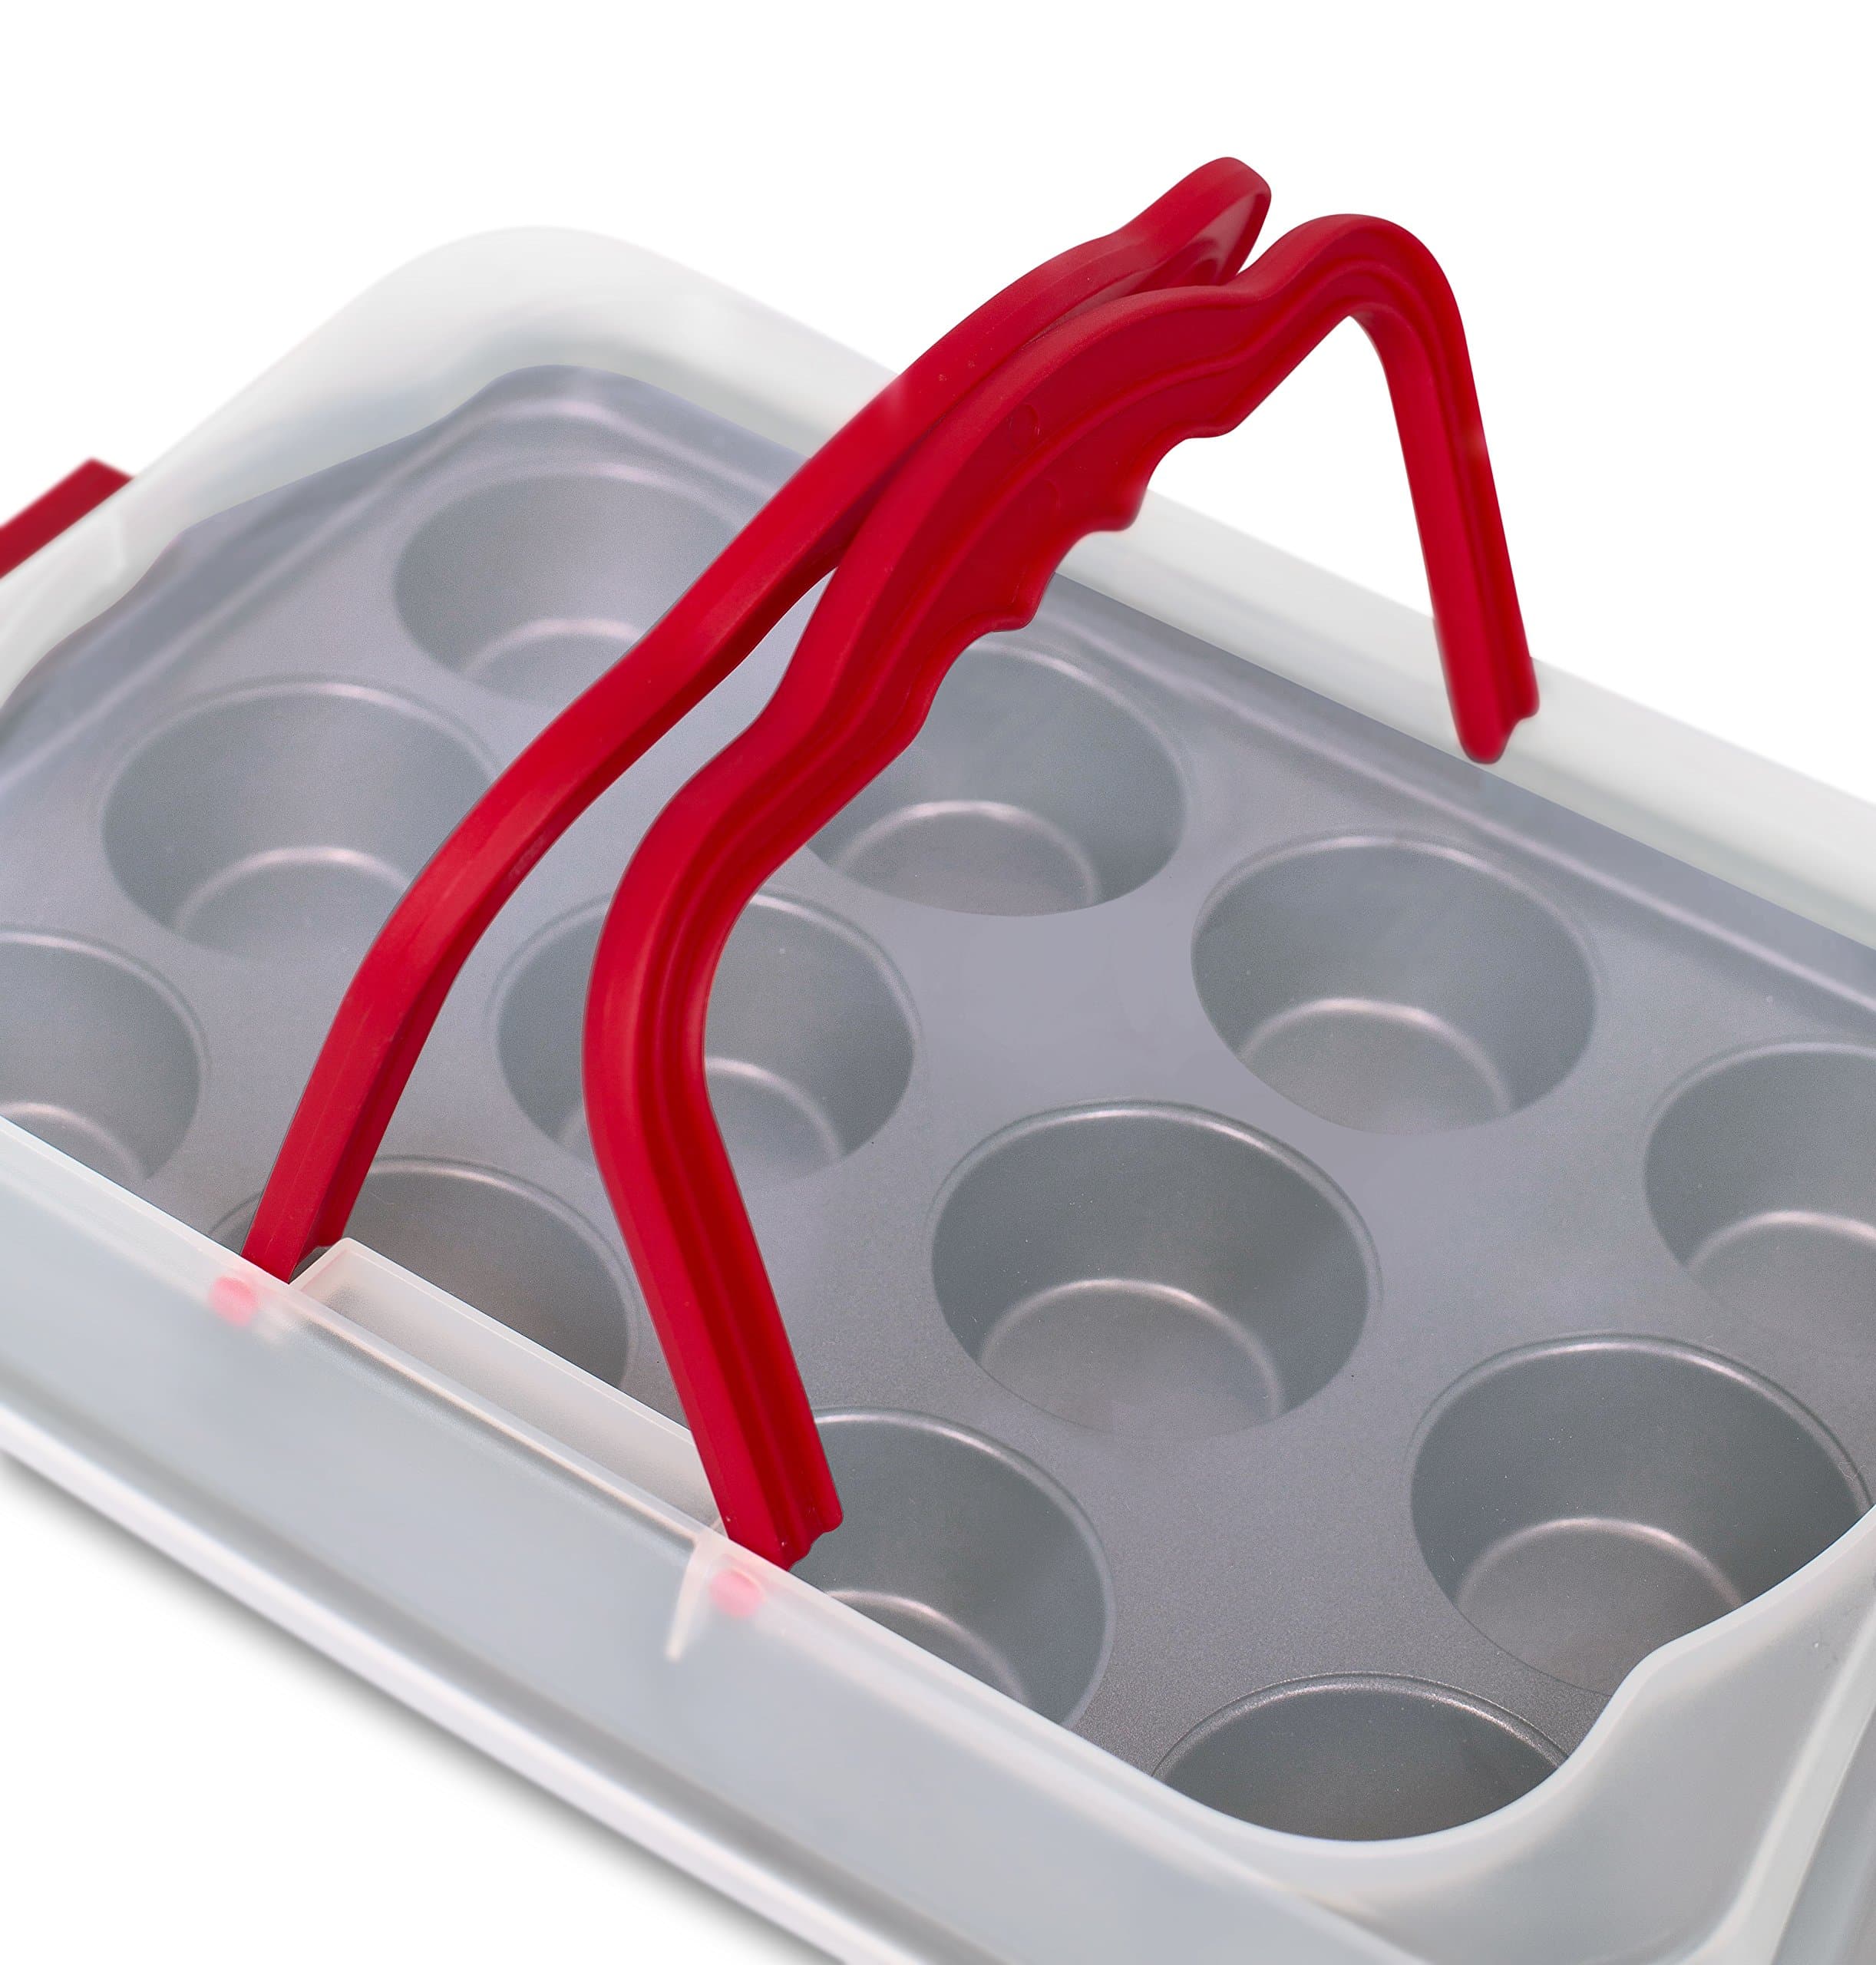 Internetâs Best Cupcake Baking Pan with Lid and Handles